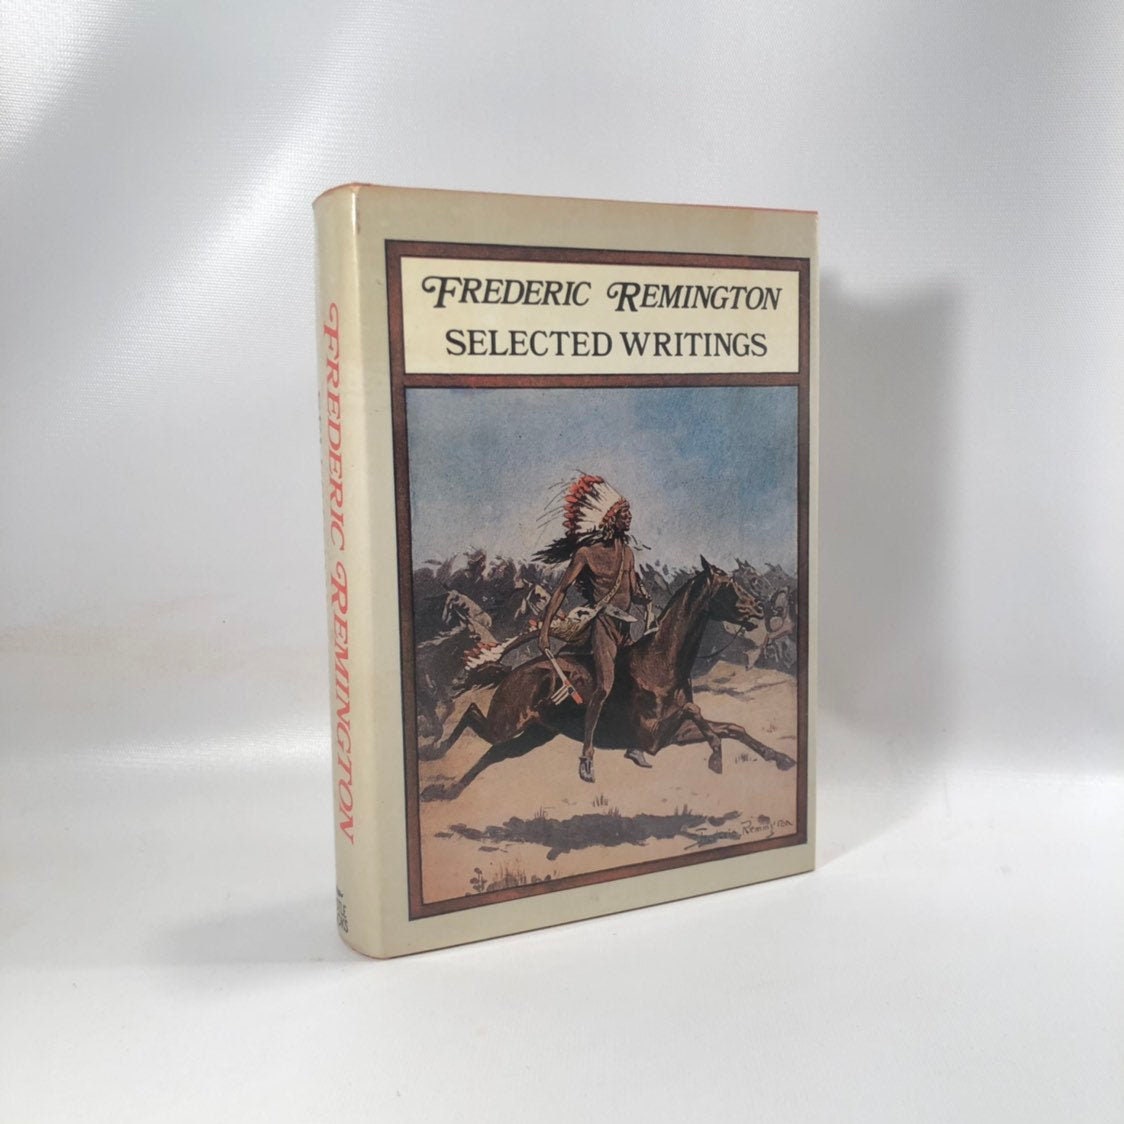 Frederic Remington's Selected Writings compiled by Frank Oppel 1981 Castle Books